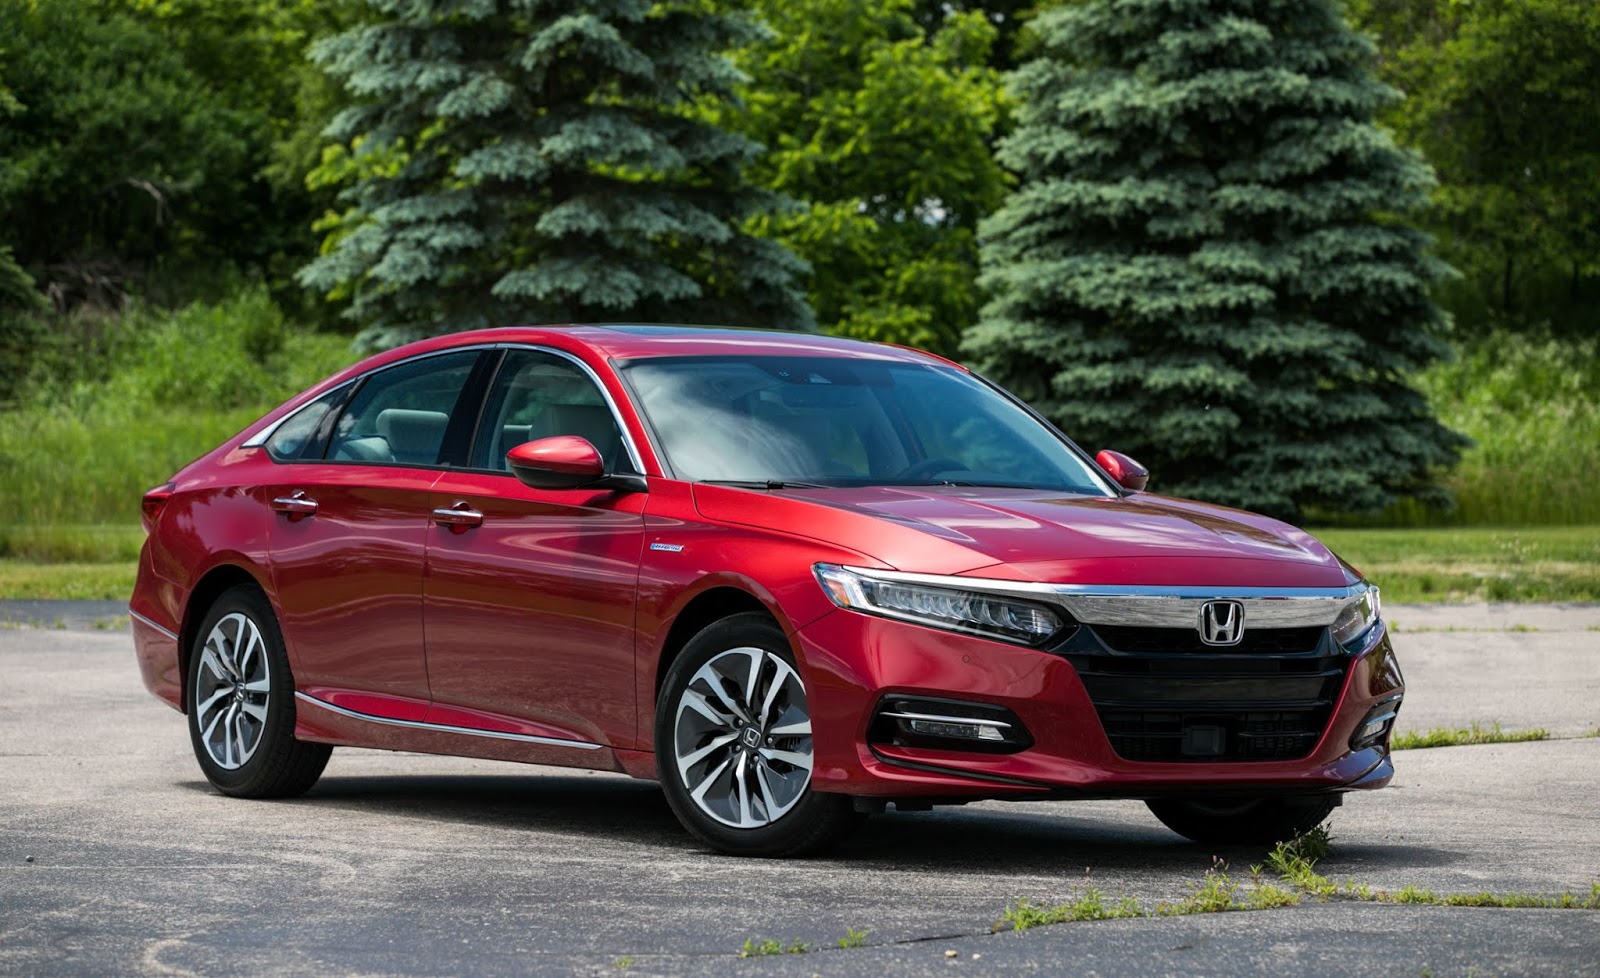 Honda Accord 2019 Price In Pakistan, Specs & Pictures | Techsolution club